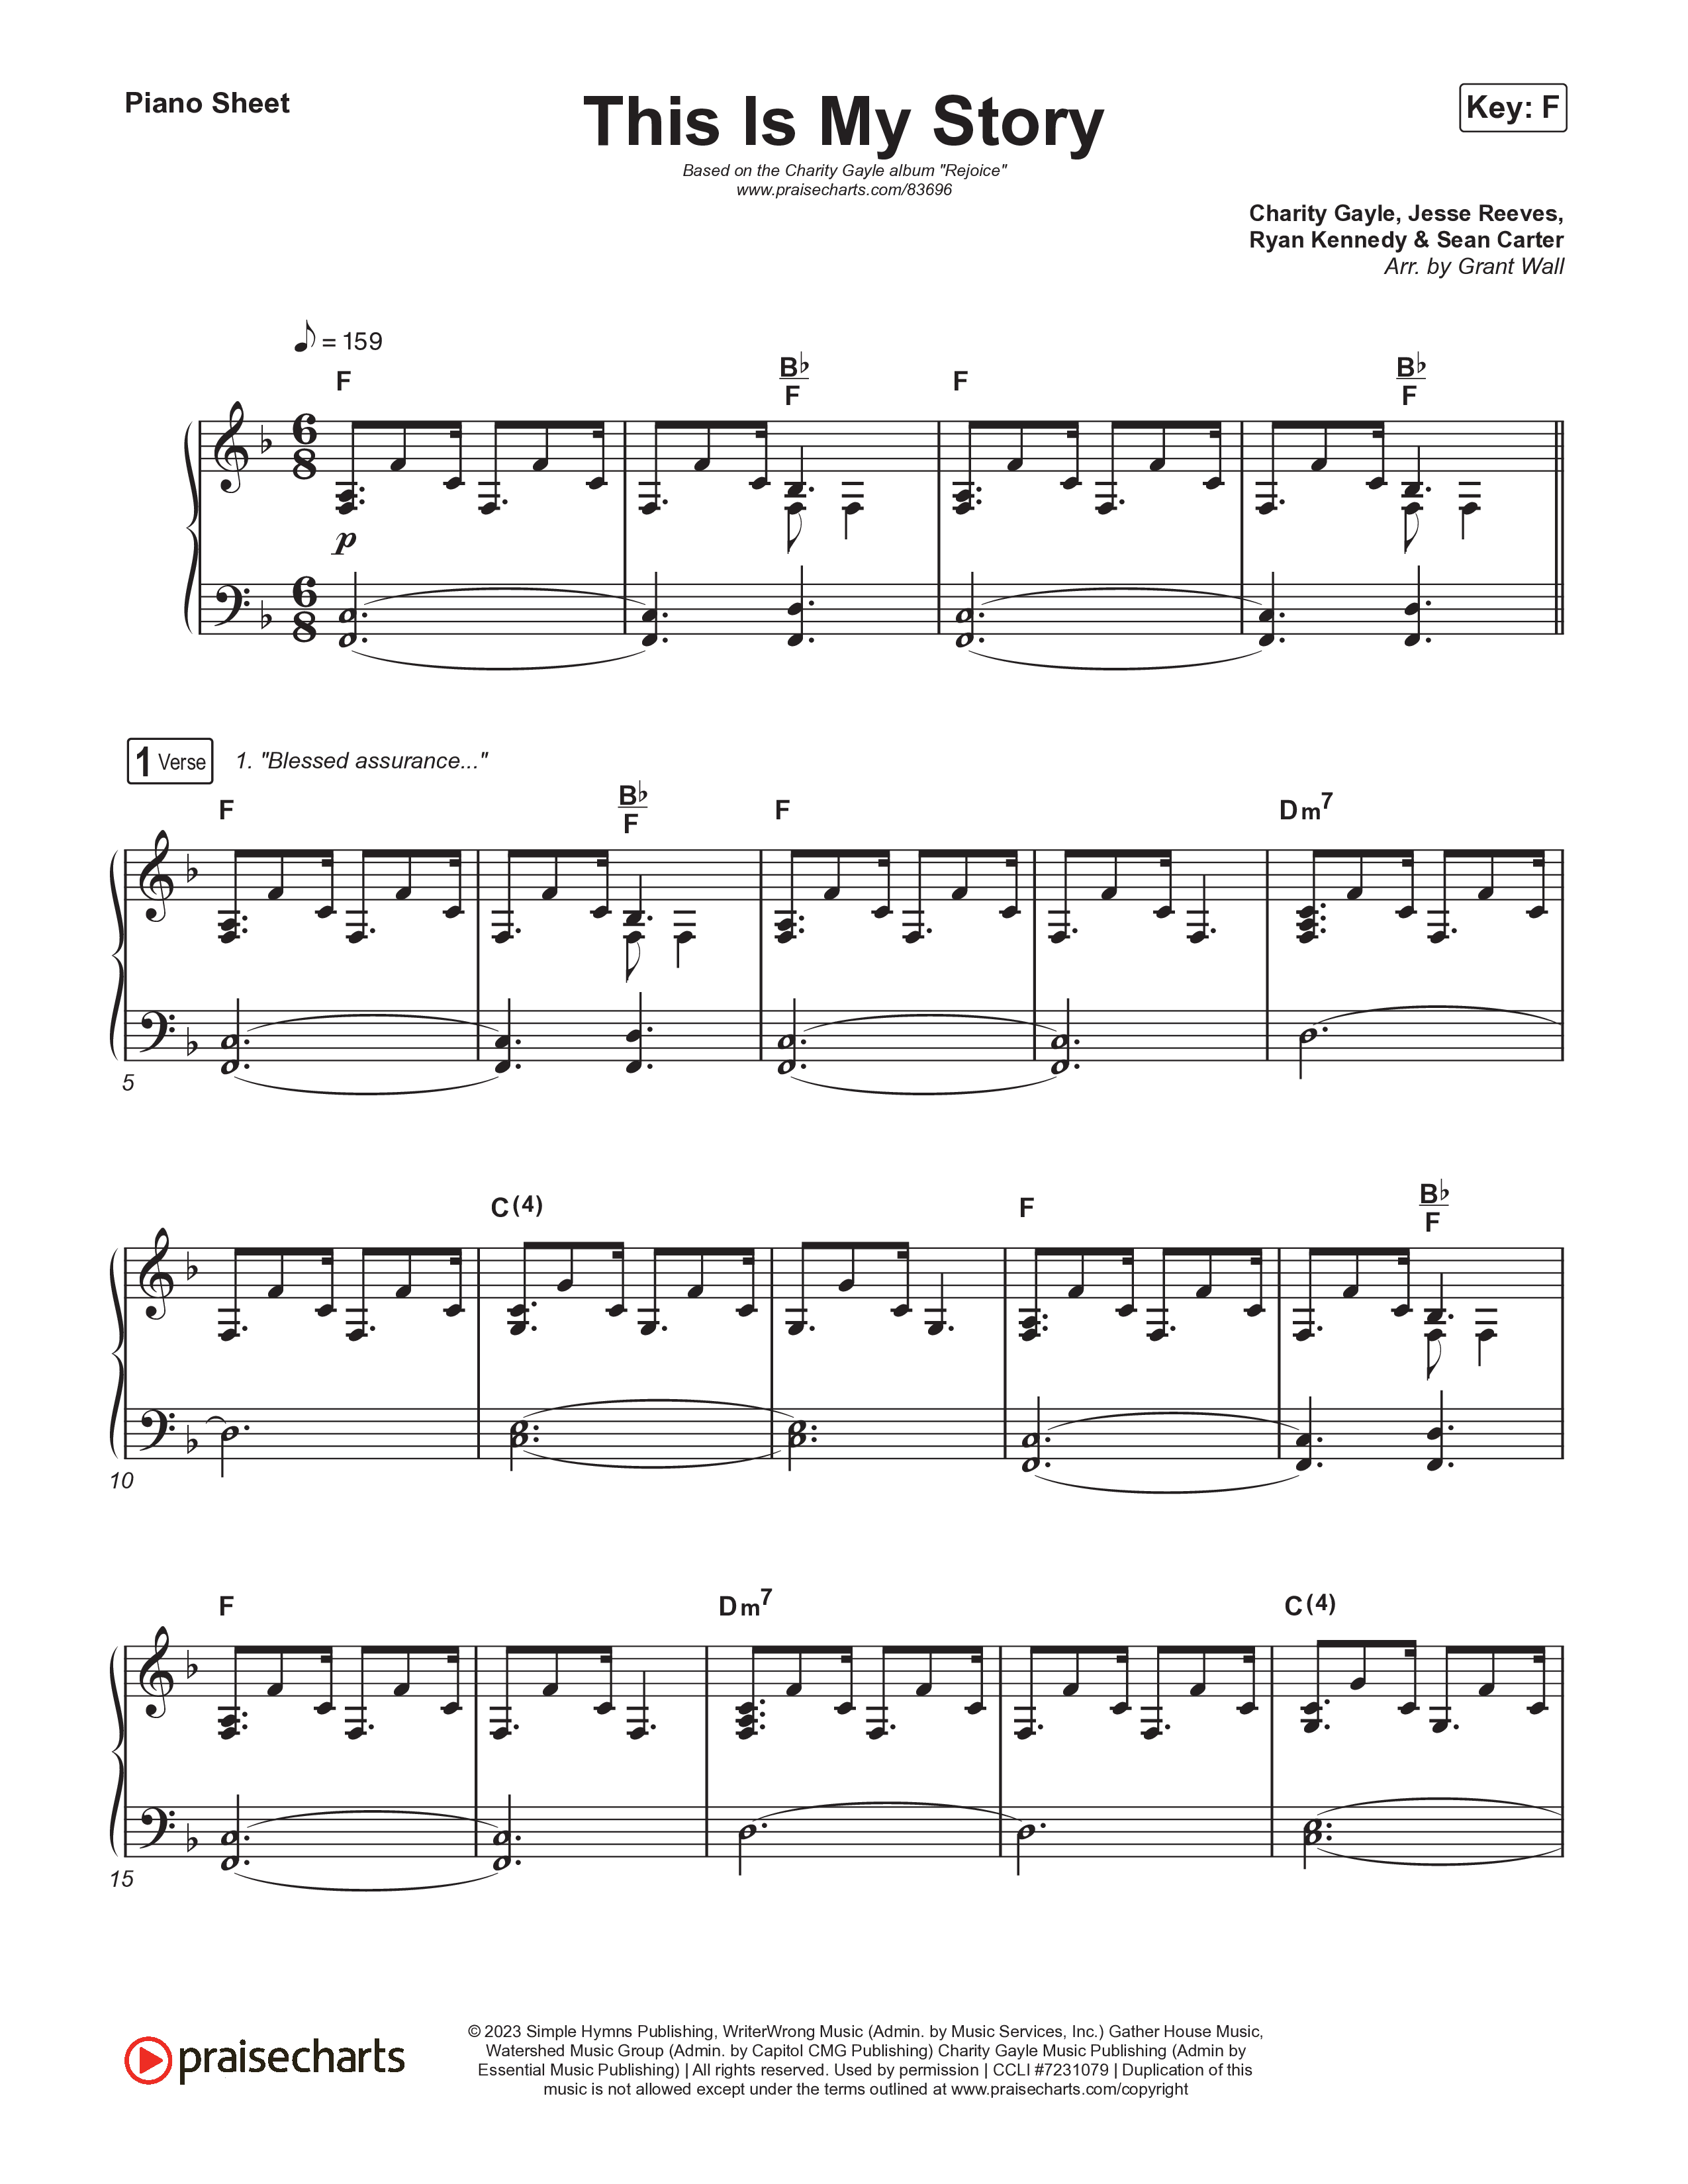 This Is My Story Piano Sheet (Charity Gayle)